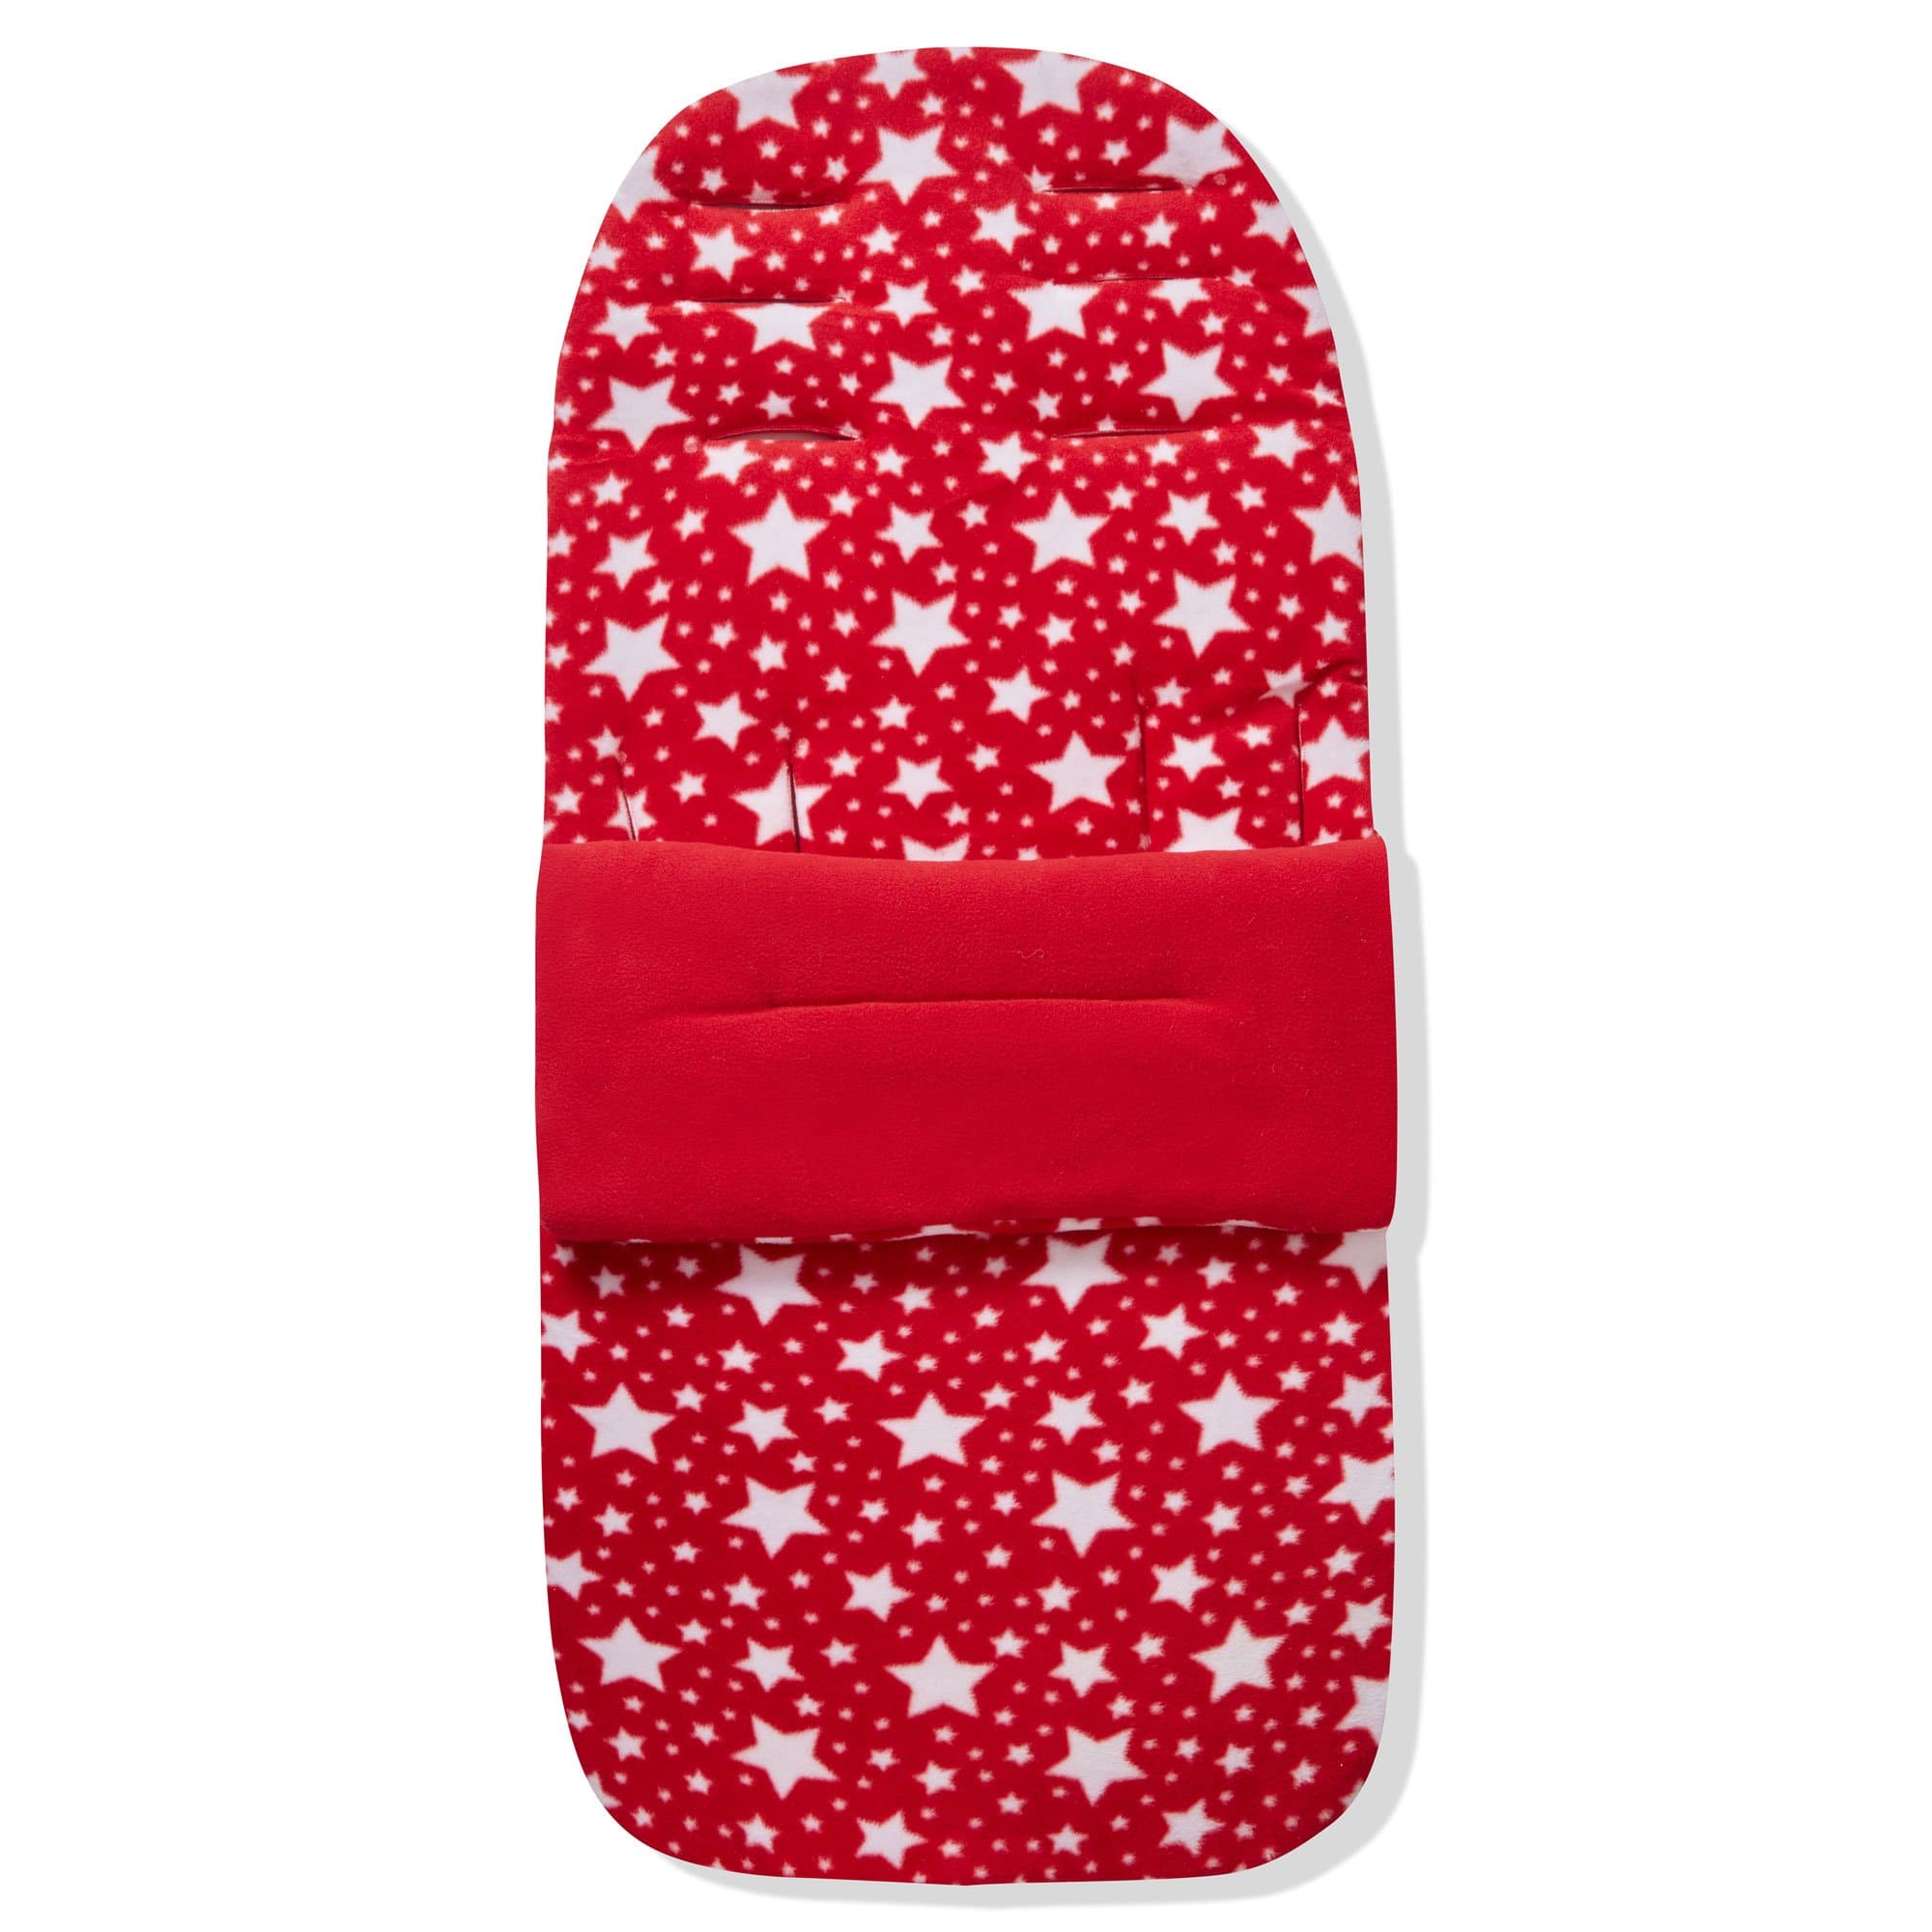 Fleece Footmuff / Cosy Toes Compatible With Cosatto - Red Star / Fits All Models | For Your Little One